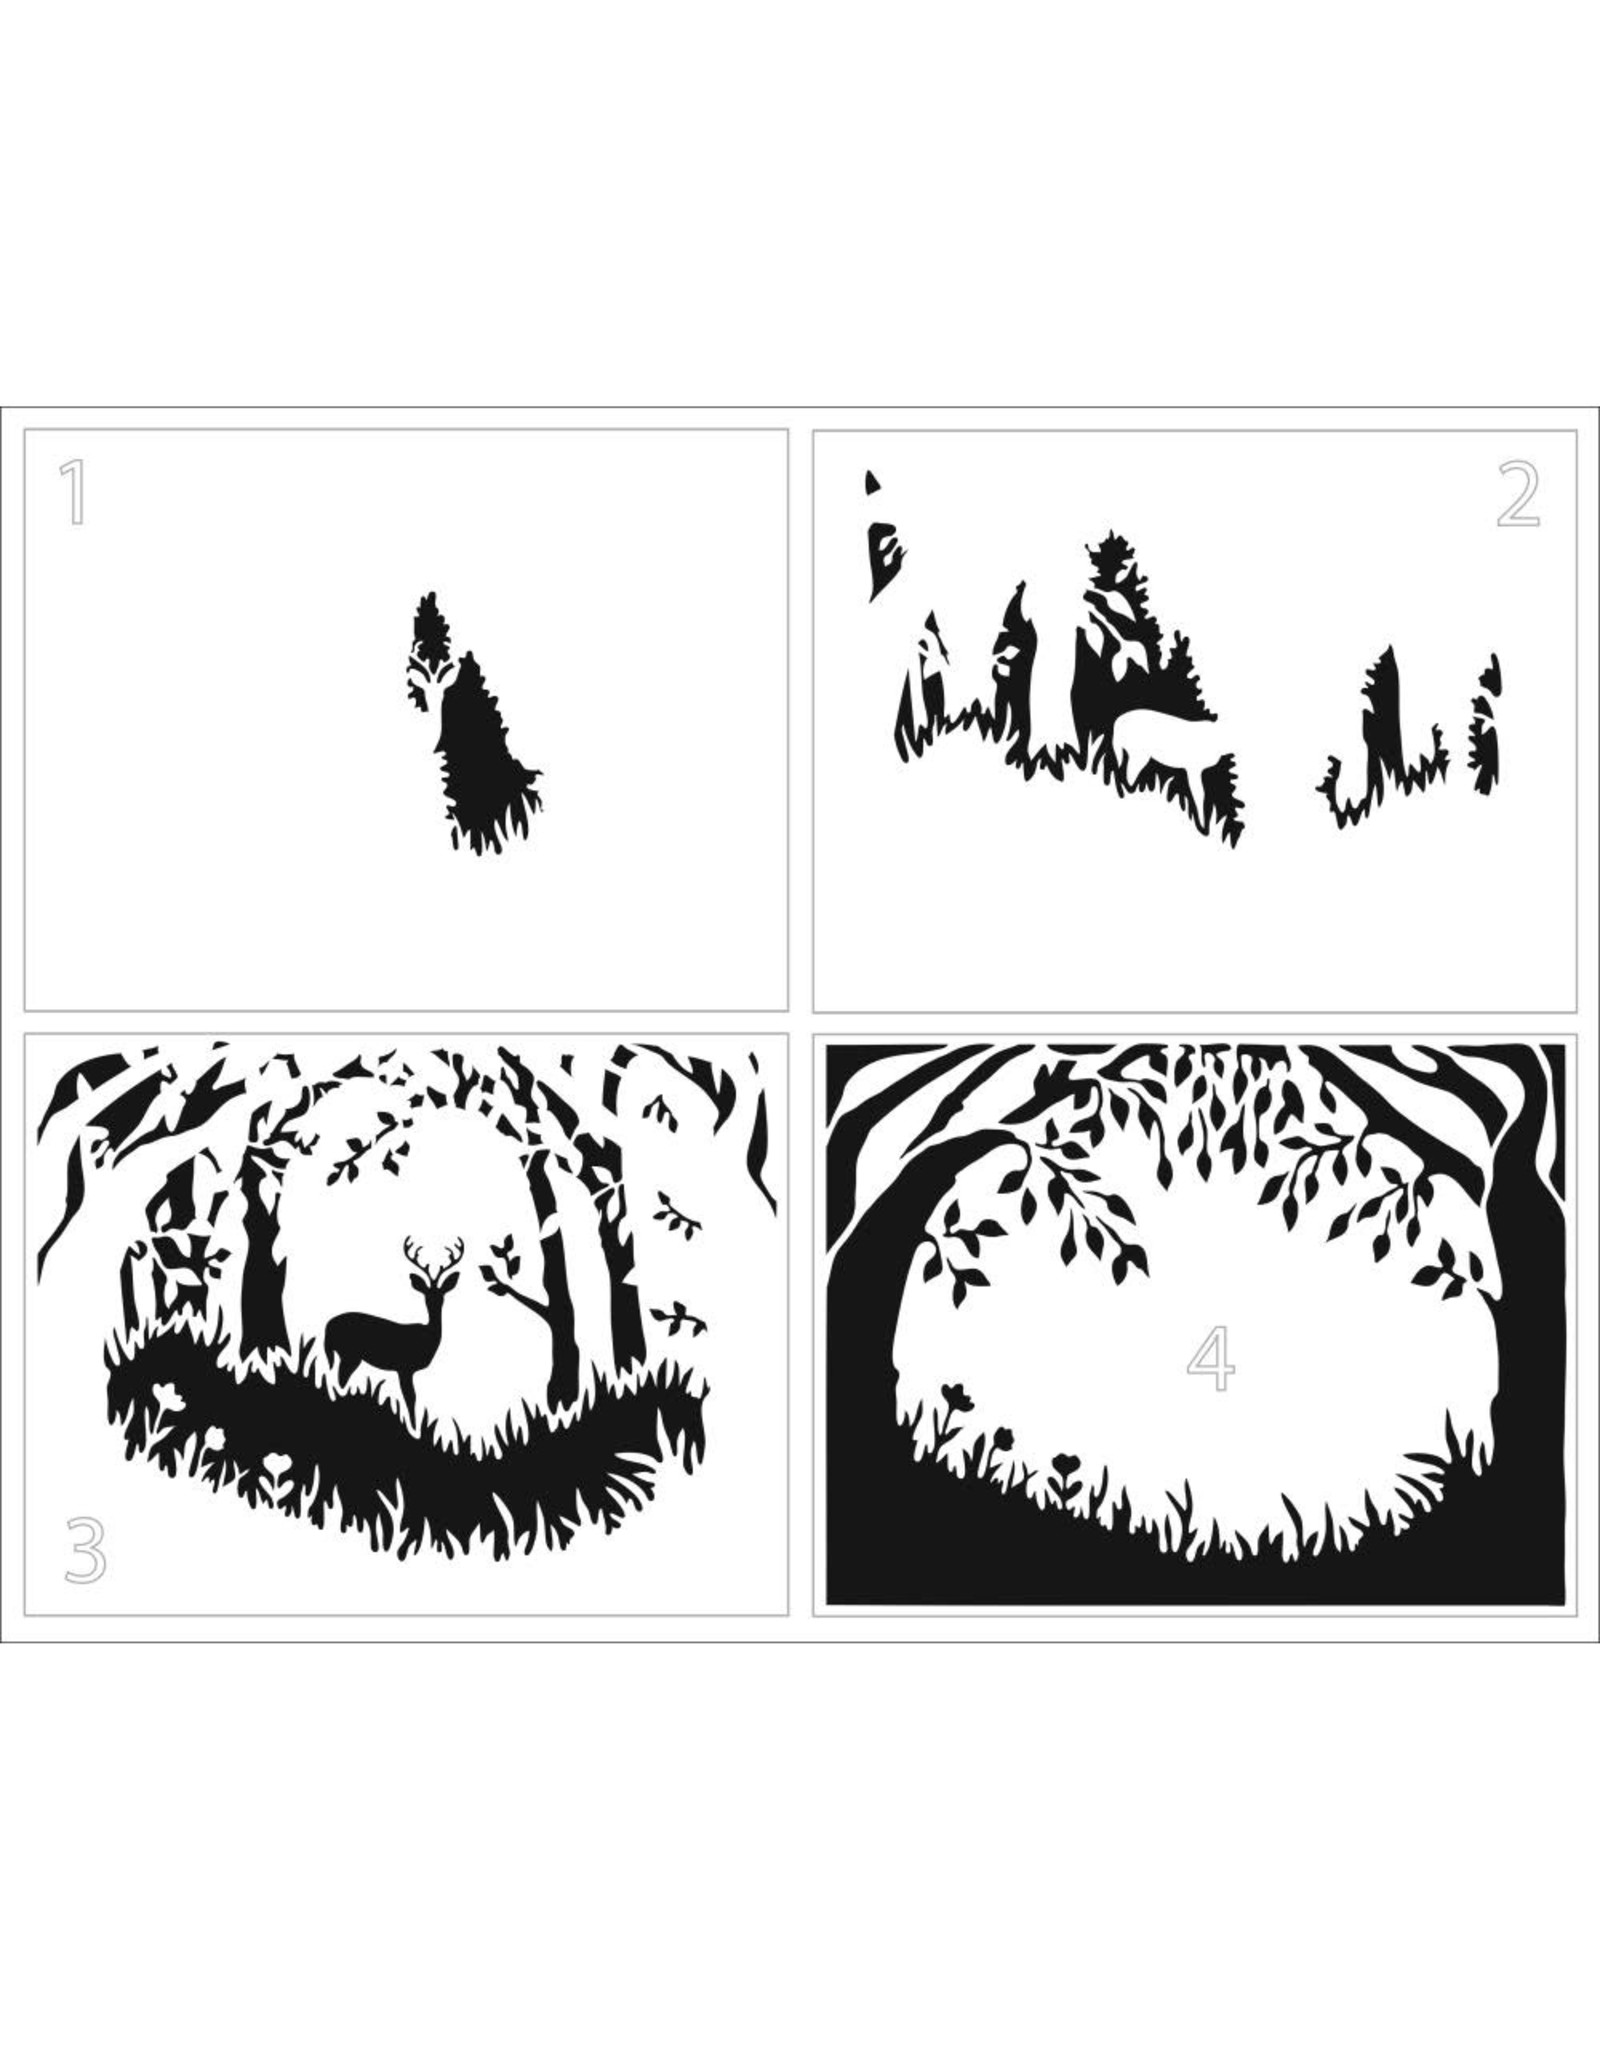 CRAFTERS WORKSHOP THE CRAFTERS WORKSHOP FOREST SCENE 8.5x11 LAYERED STENCIL